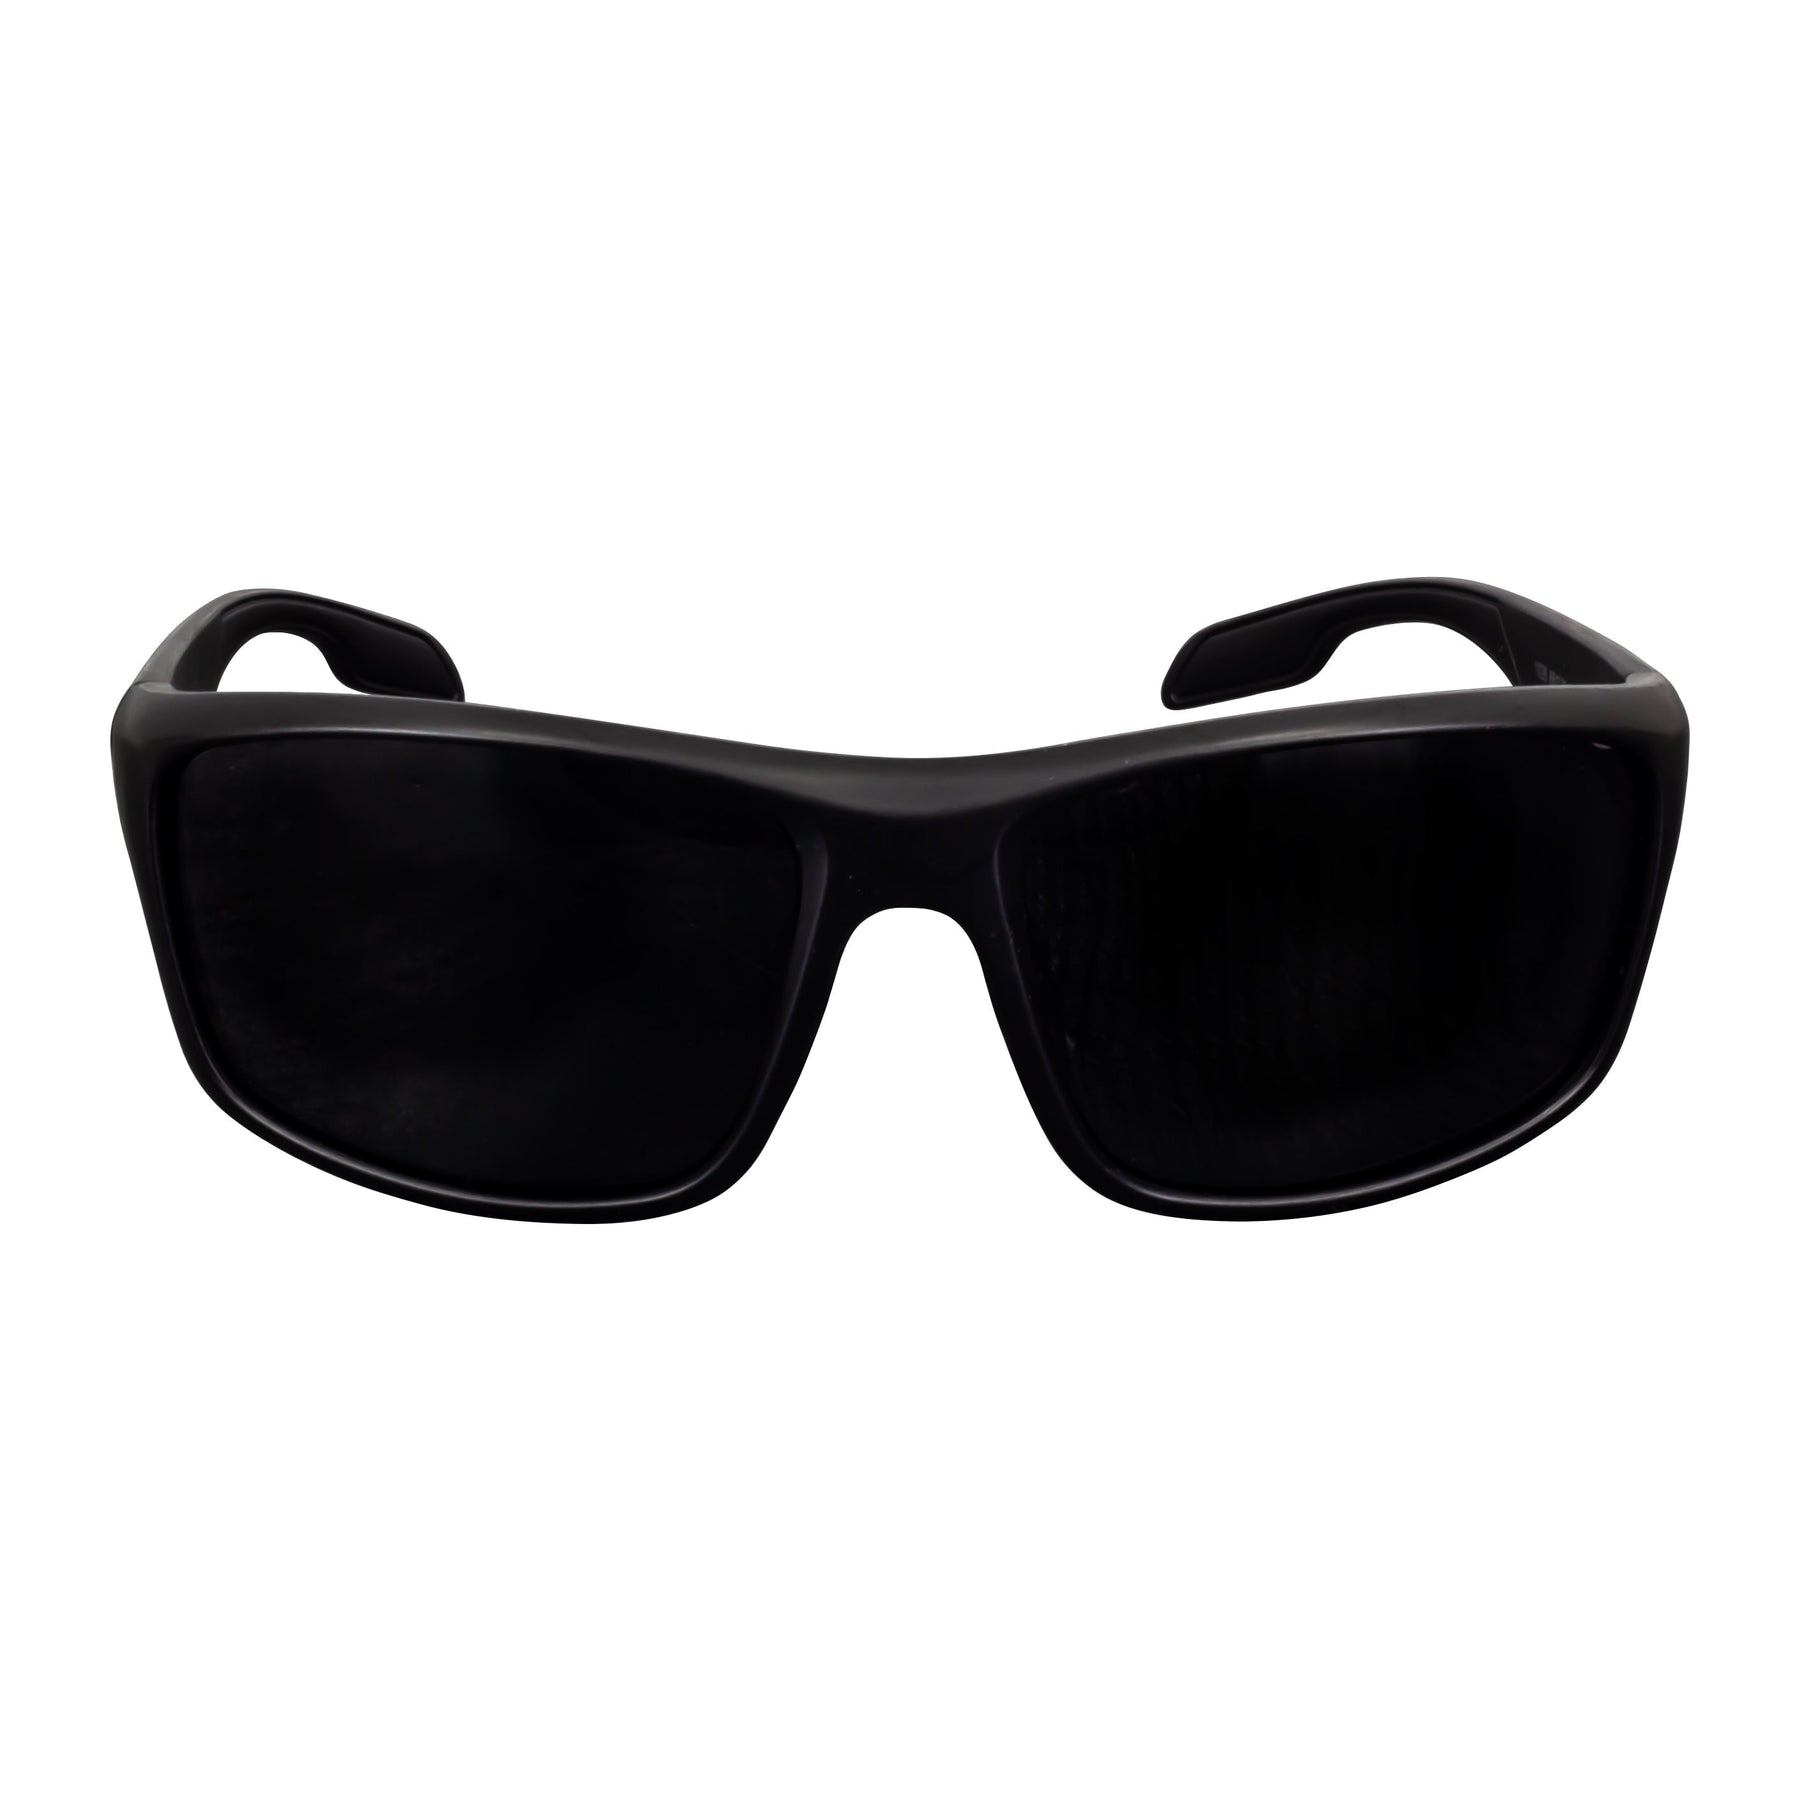 Battle Vision - Trooper Vision HD Polarized UV Sunglasses by